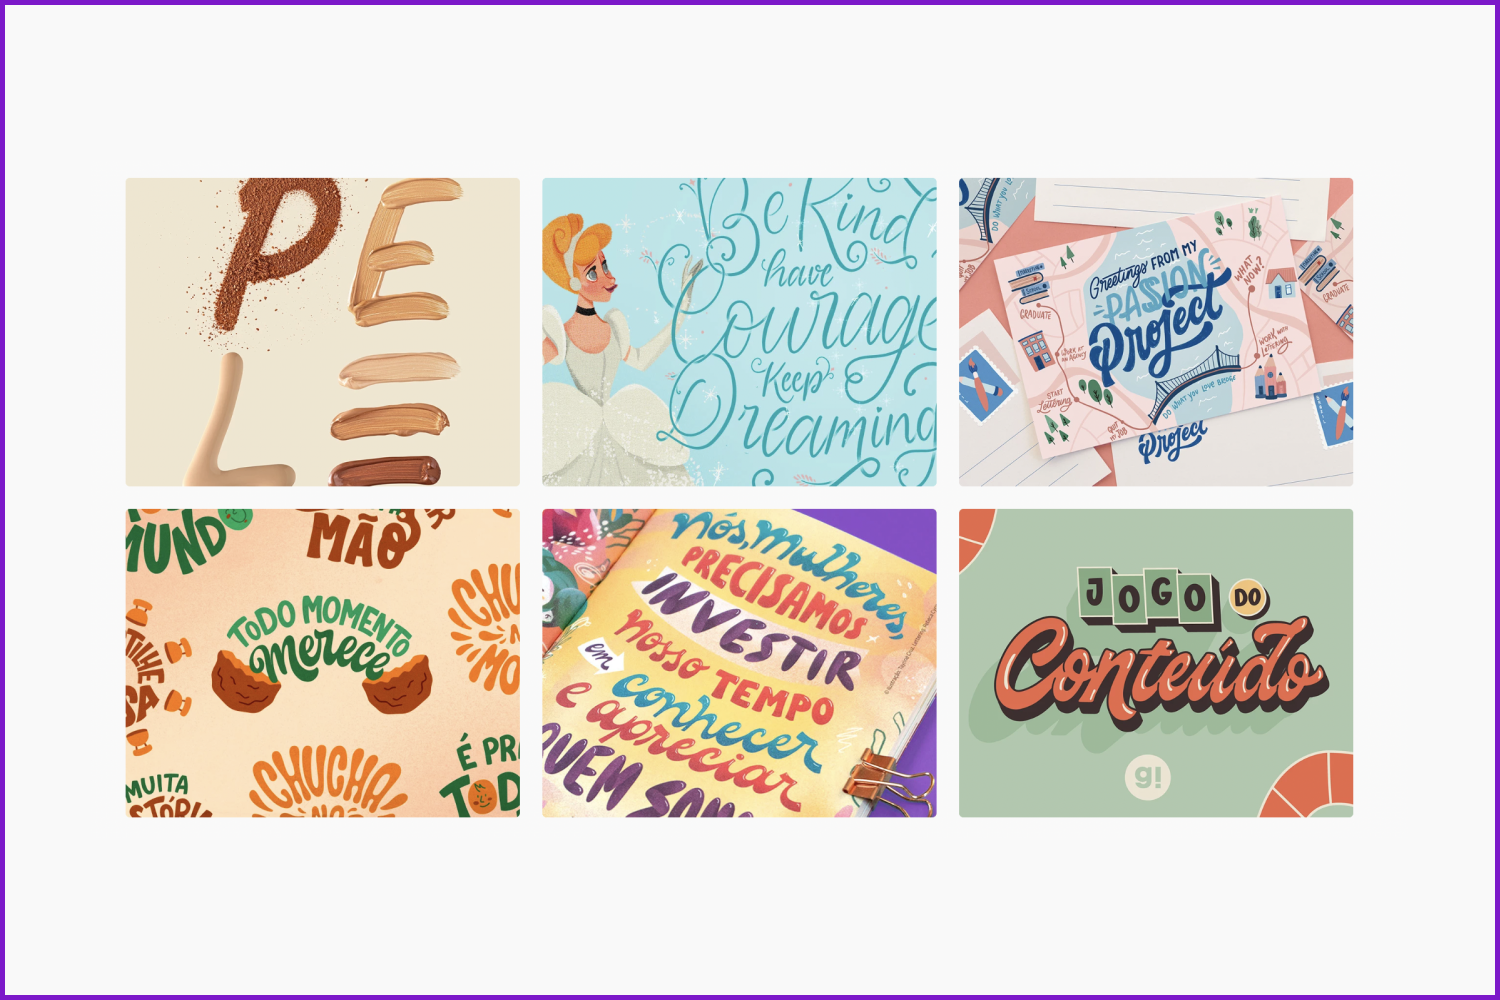 A collage of images of font variants created by Rebeca Cyrineu.